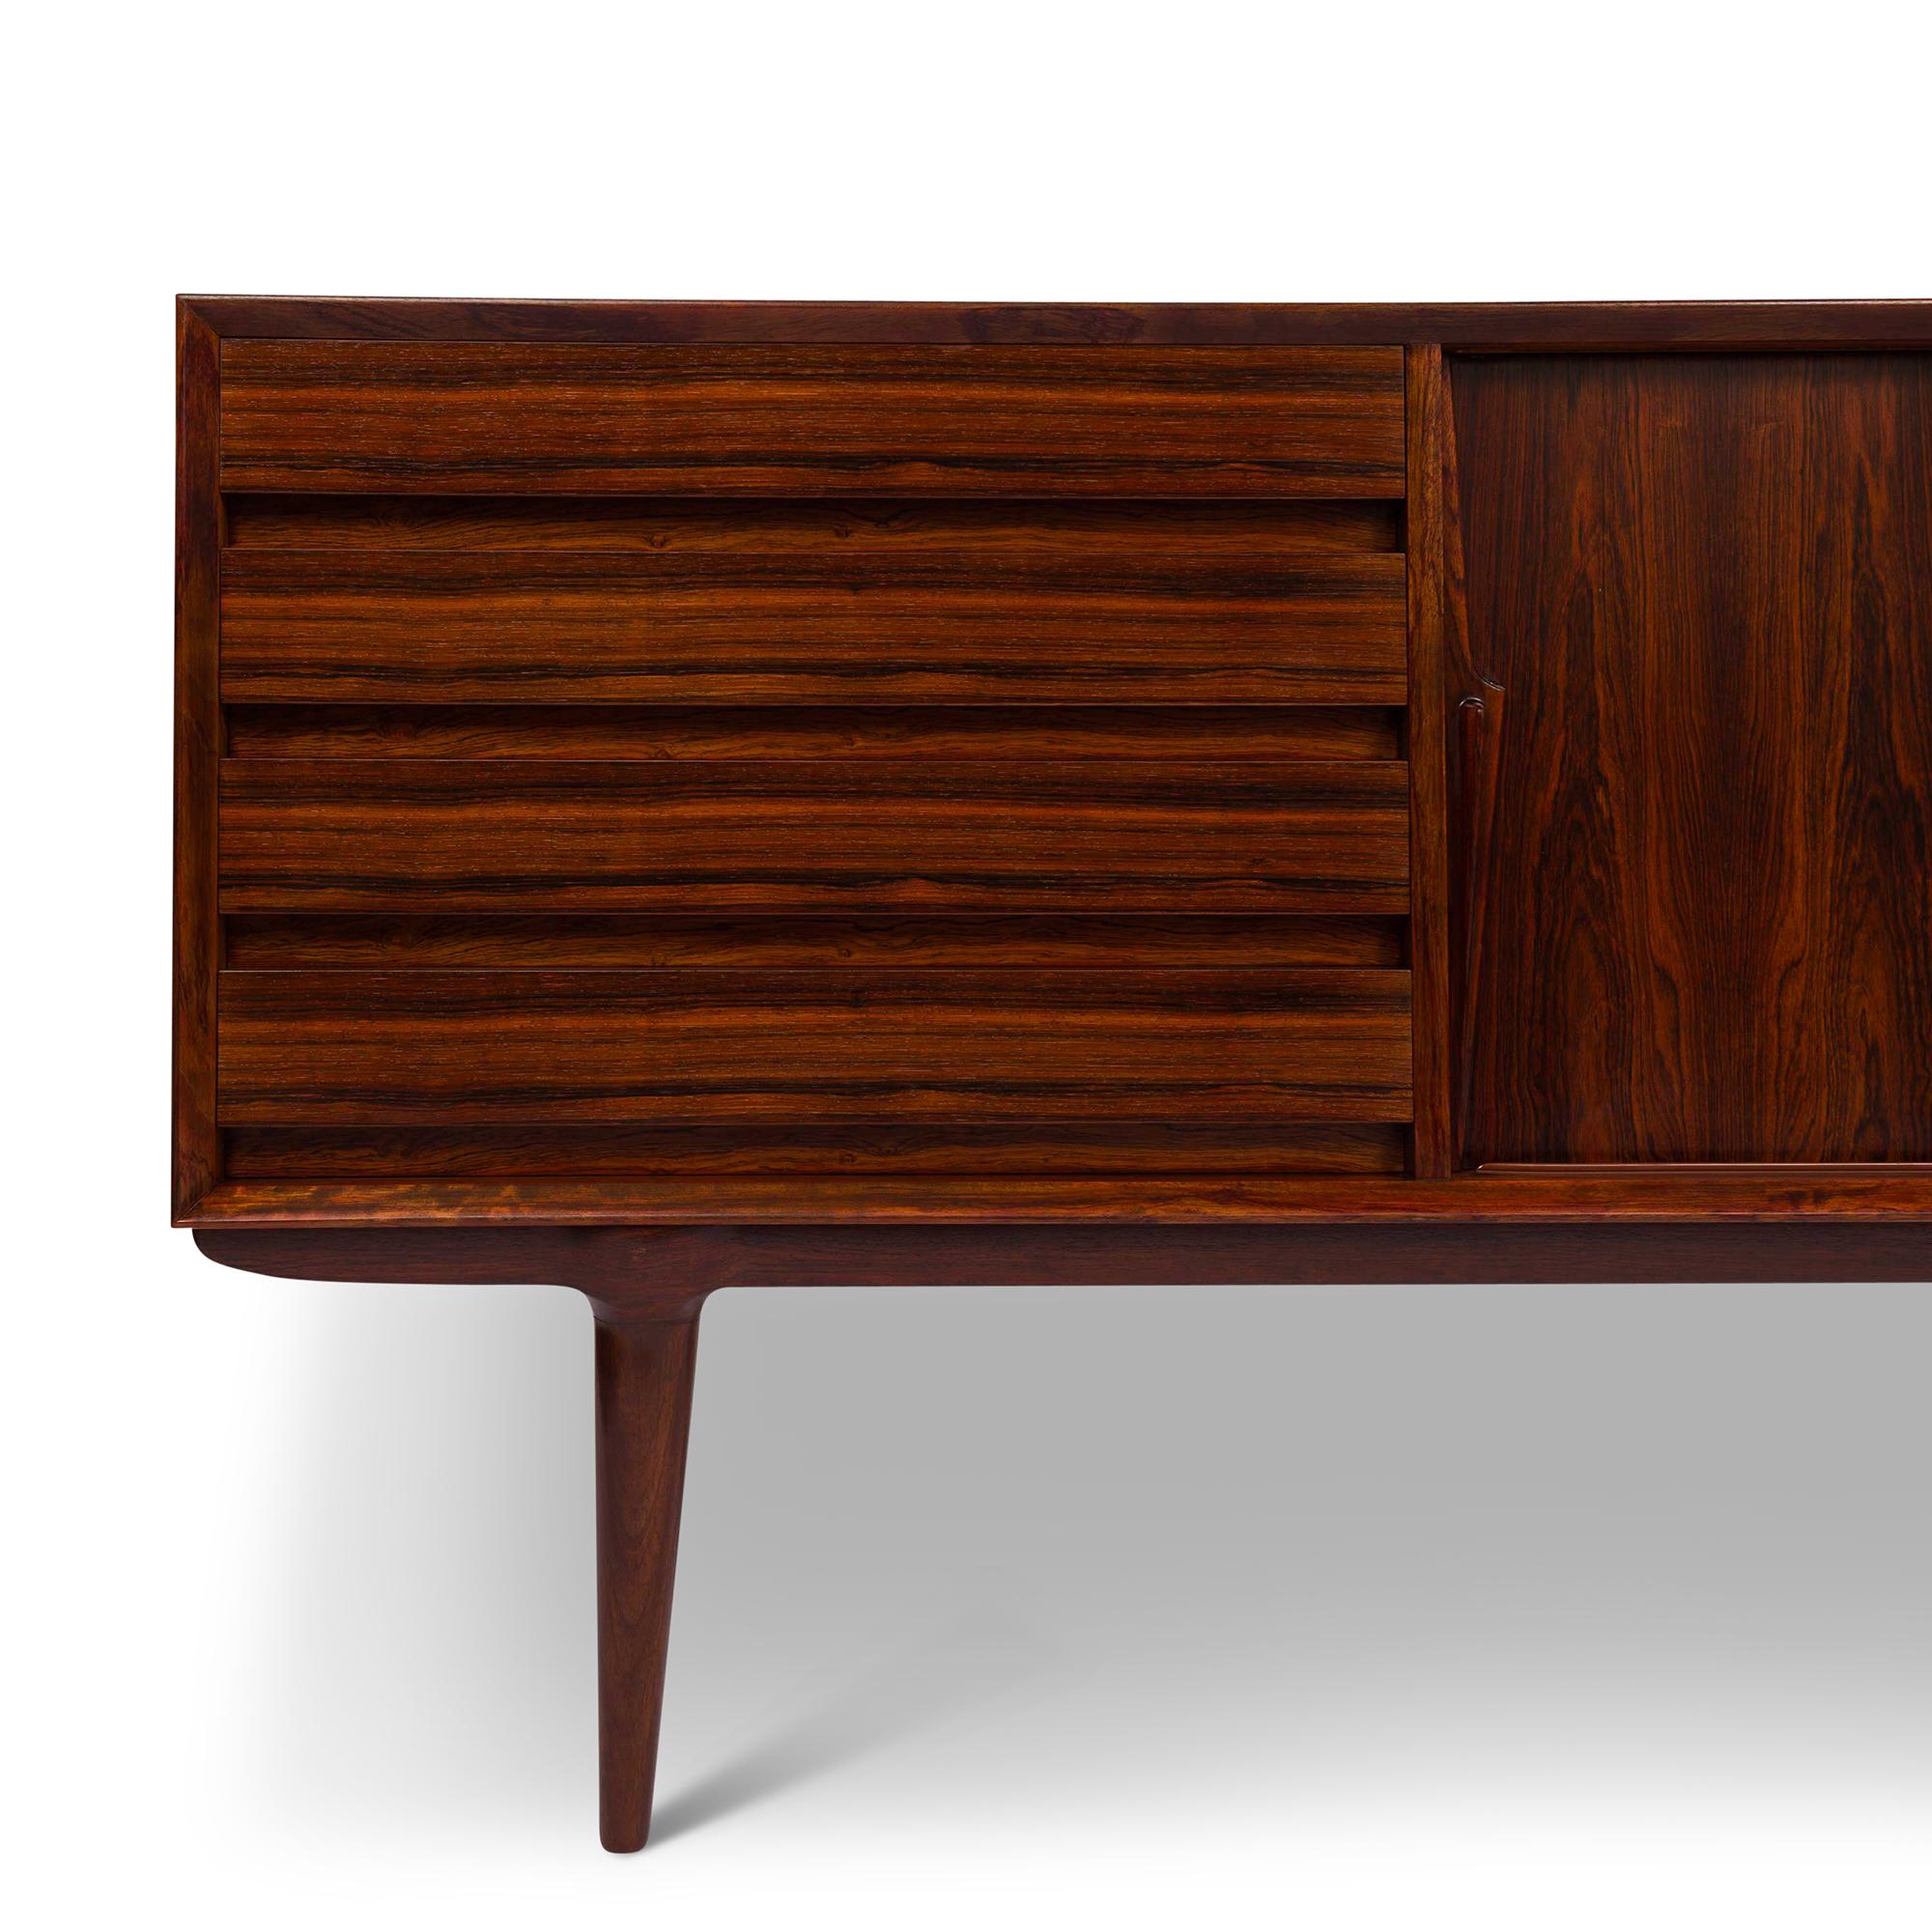 Vintage Gunni Omann Model 18 Credenza in Rosewood In Excellent Condition For Sale In Emeryville, CA